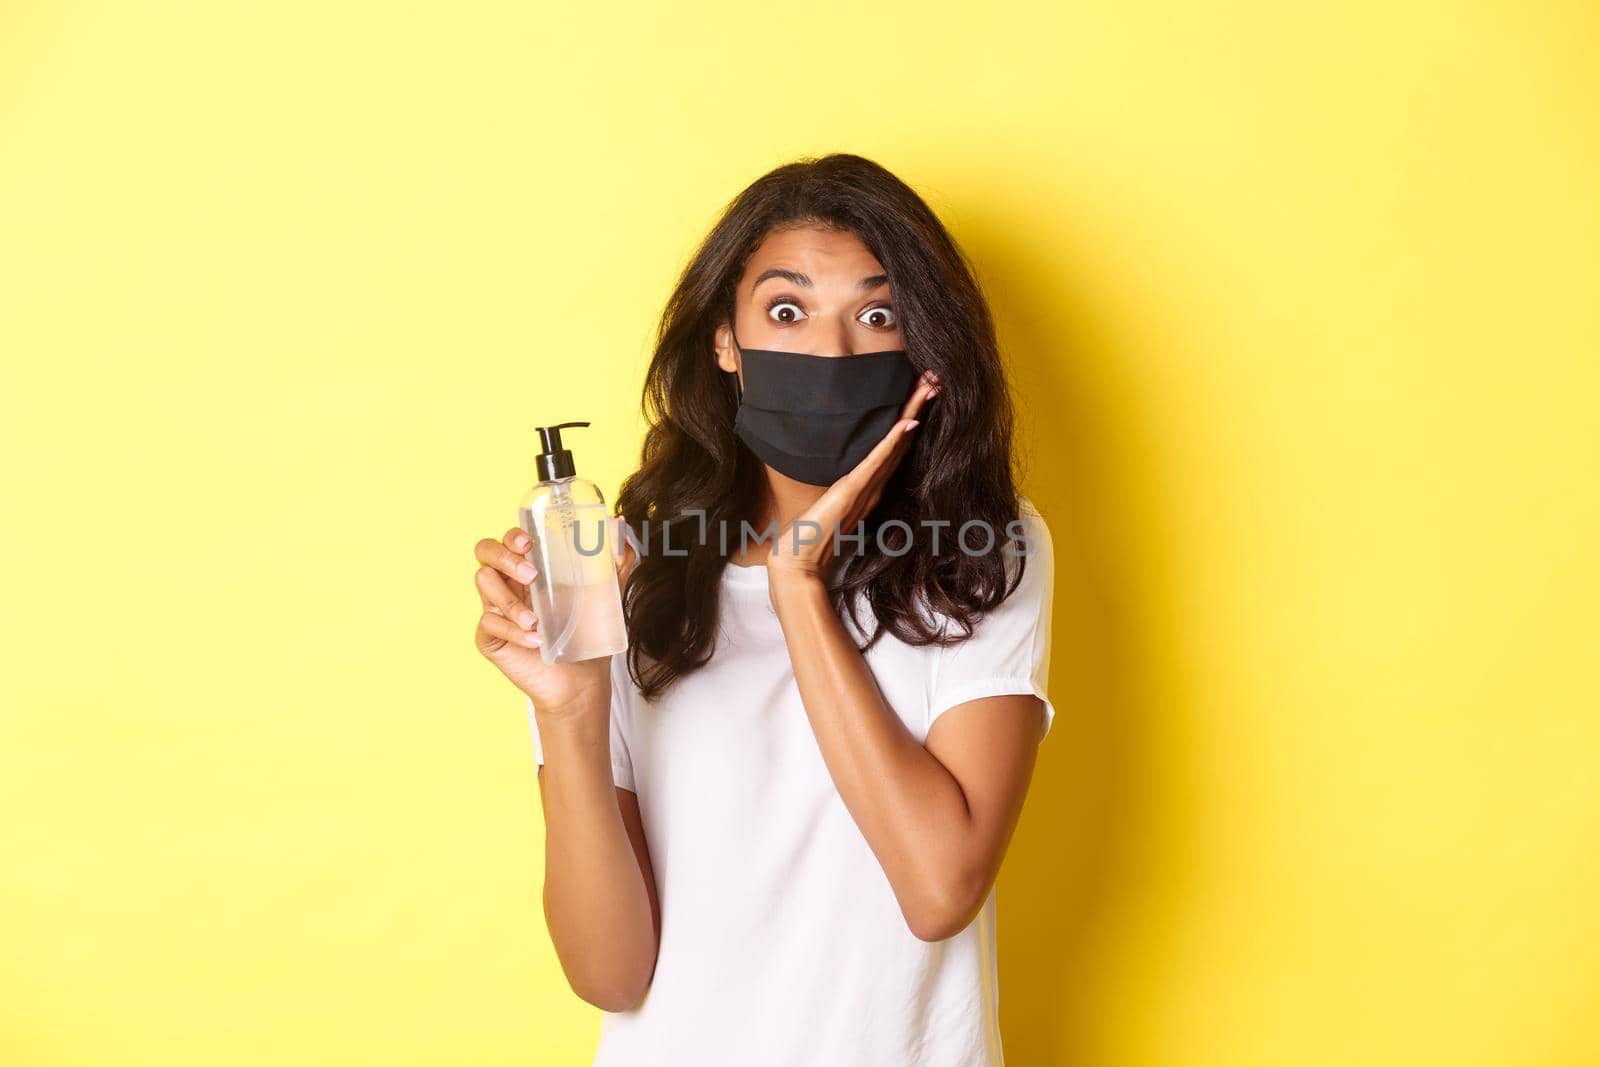 Concept of covid-19, social distancing and lifestyle. Image of impressed african-american girl in face mask, showing good hand sanitizer, recommending product, yellow background.